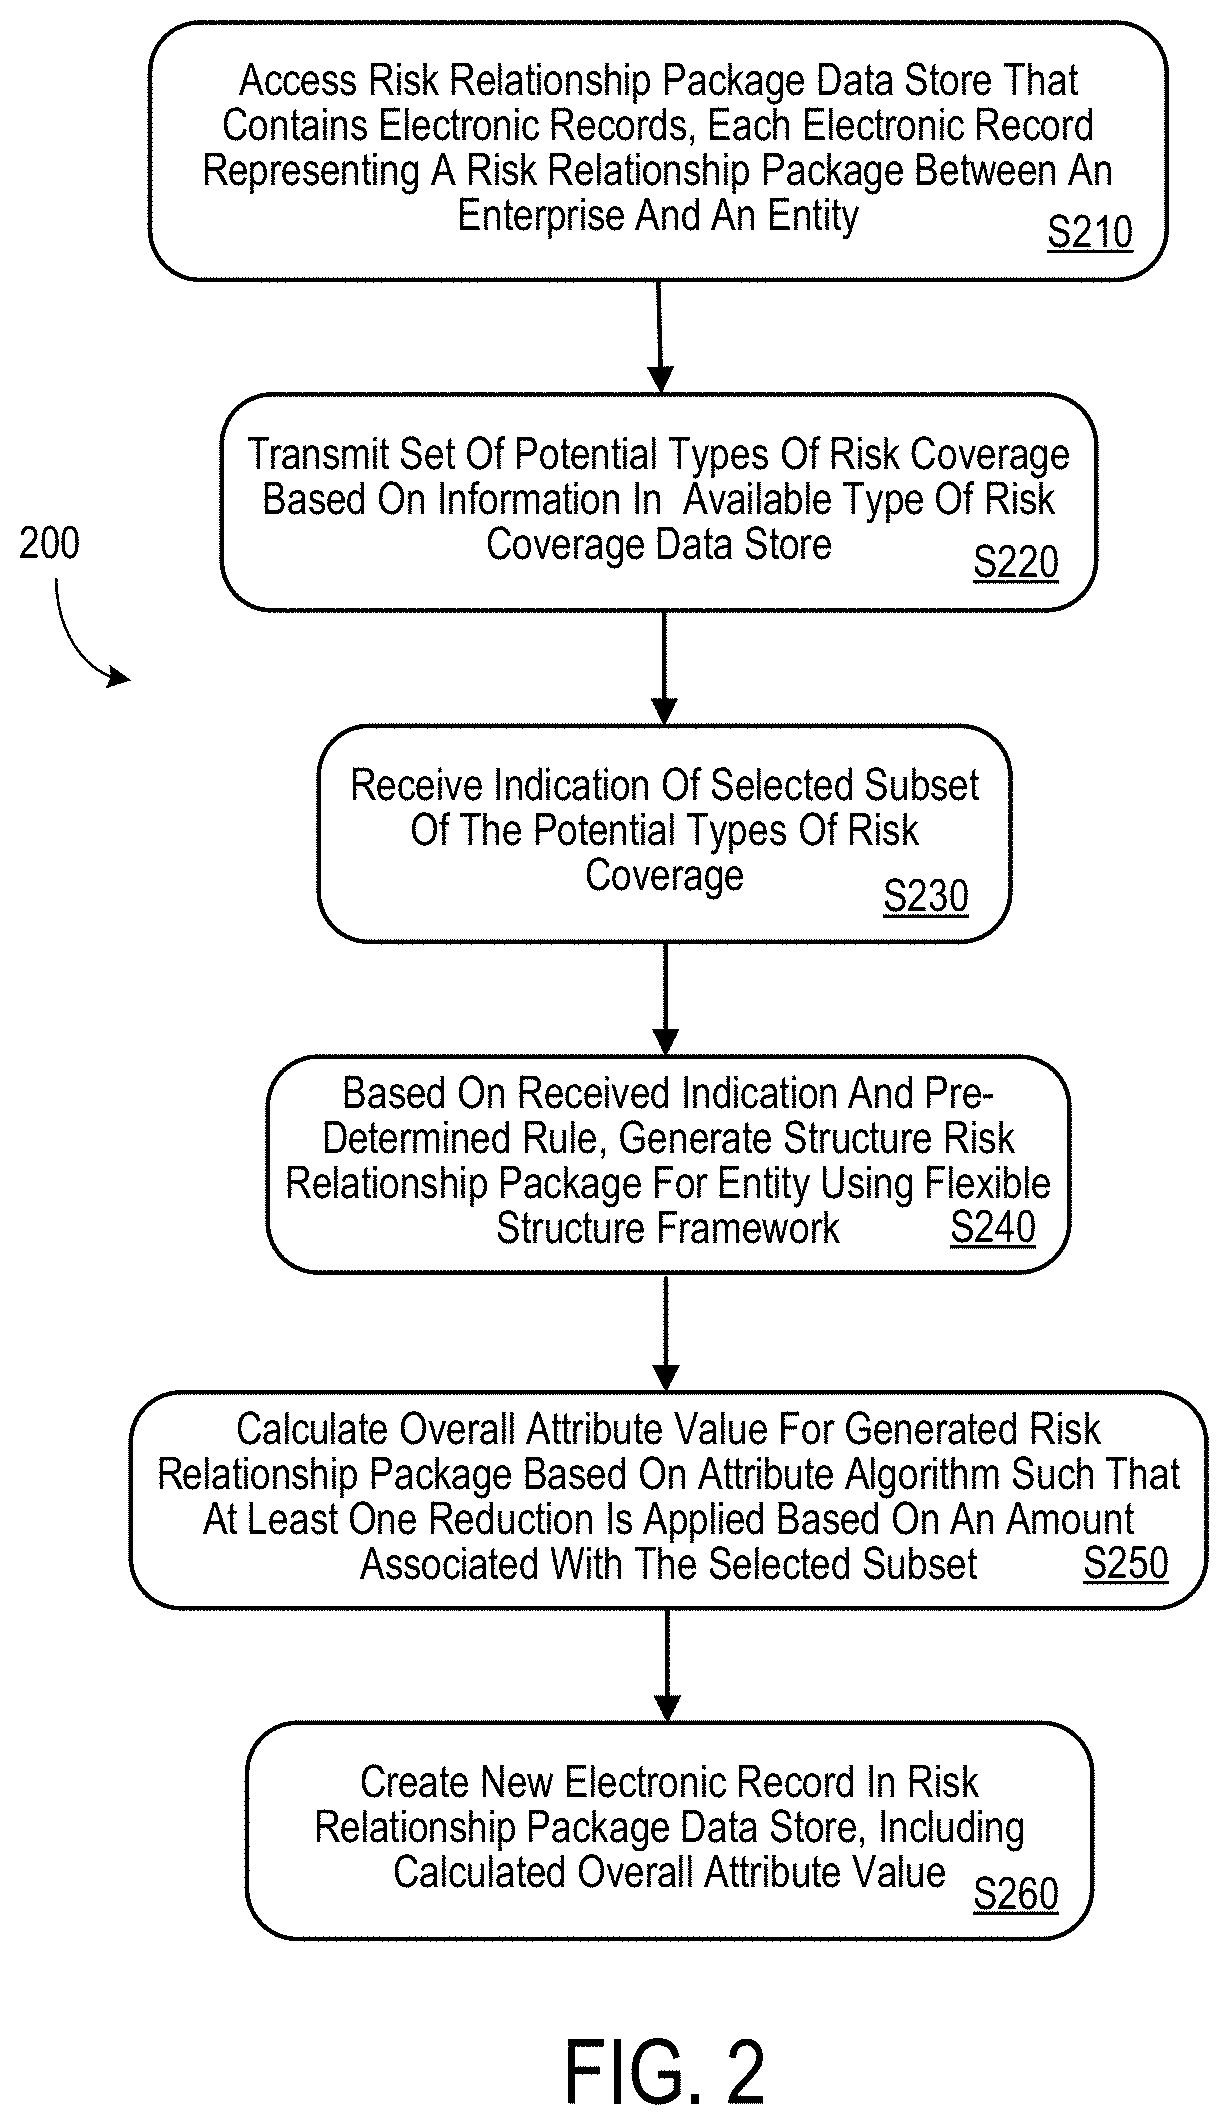 System and method to generate risk relationship package using a flexible structure framework